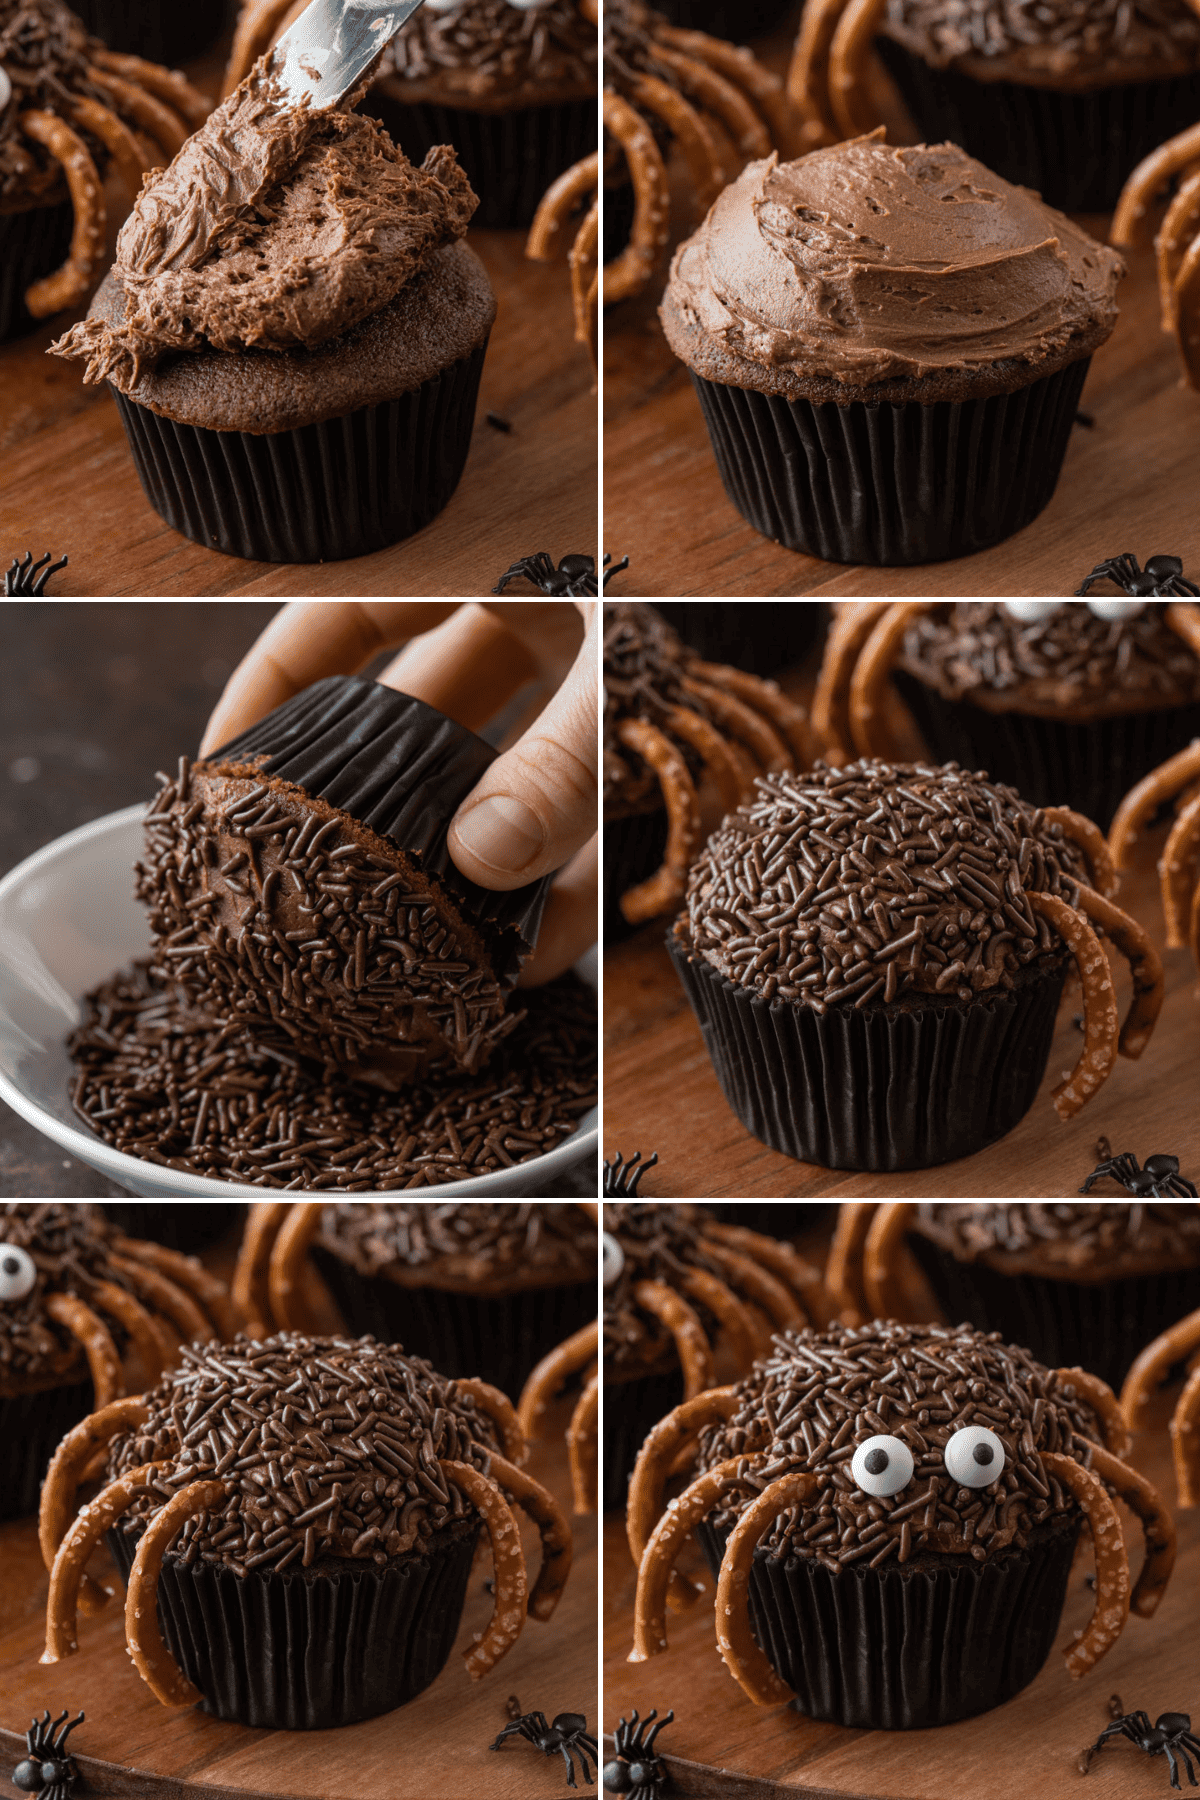 a collage of the steps to make spider cupcakes, icing a chocolate cupcake then dipping in sprinkles, adding legs and mini candy eyes